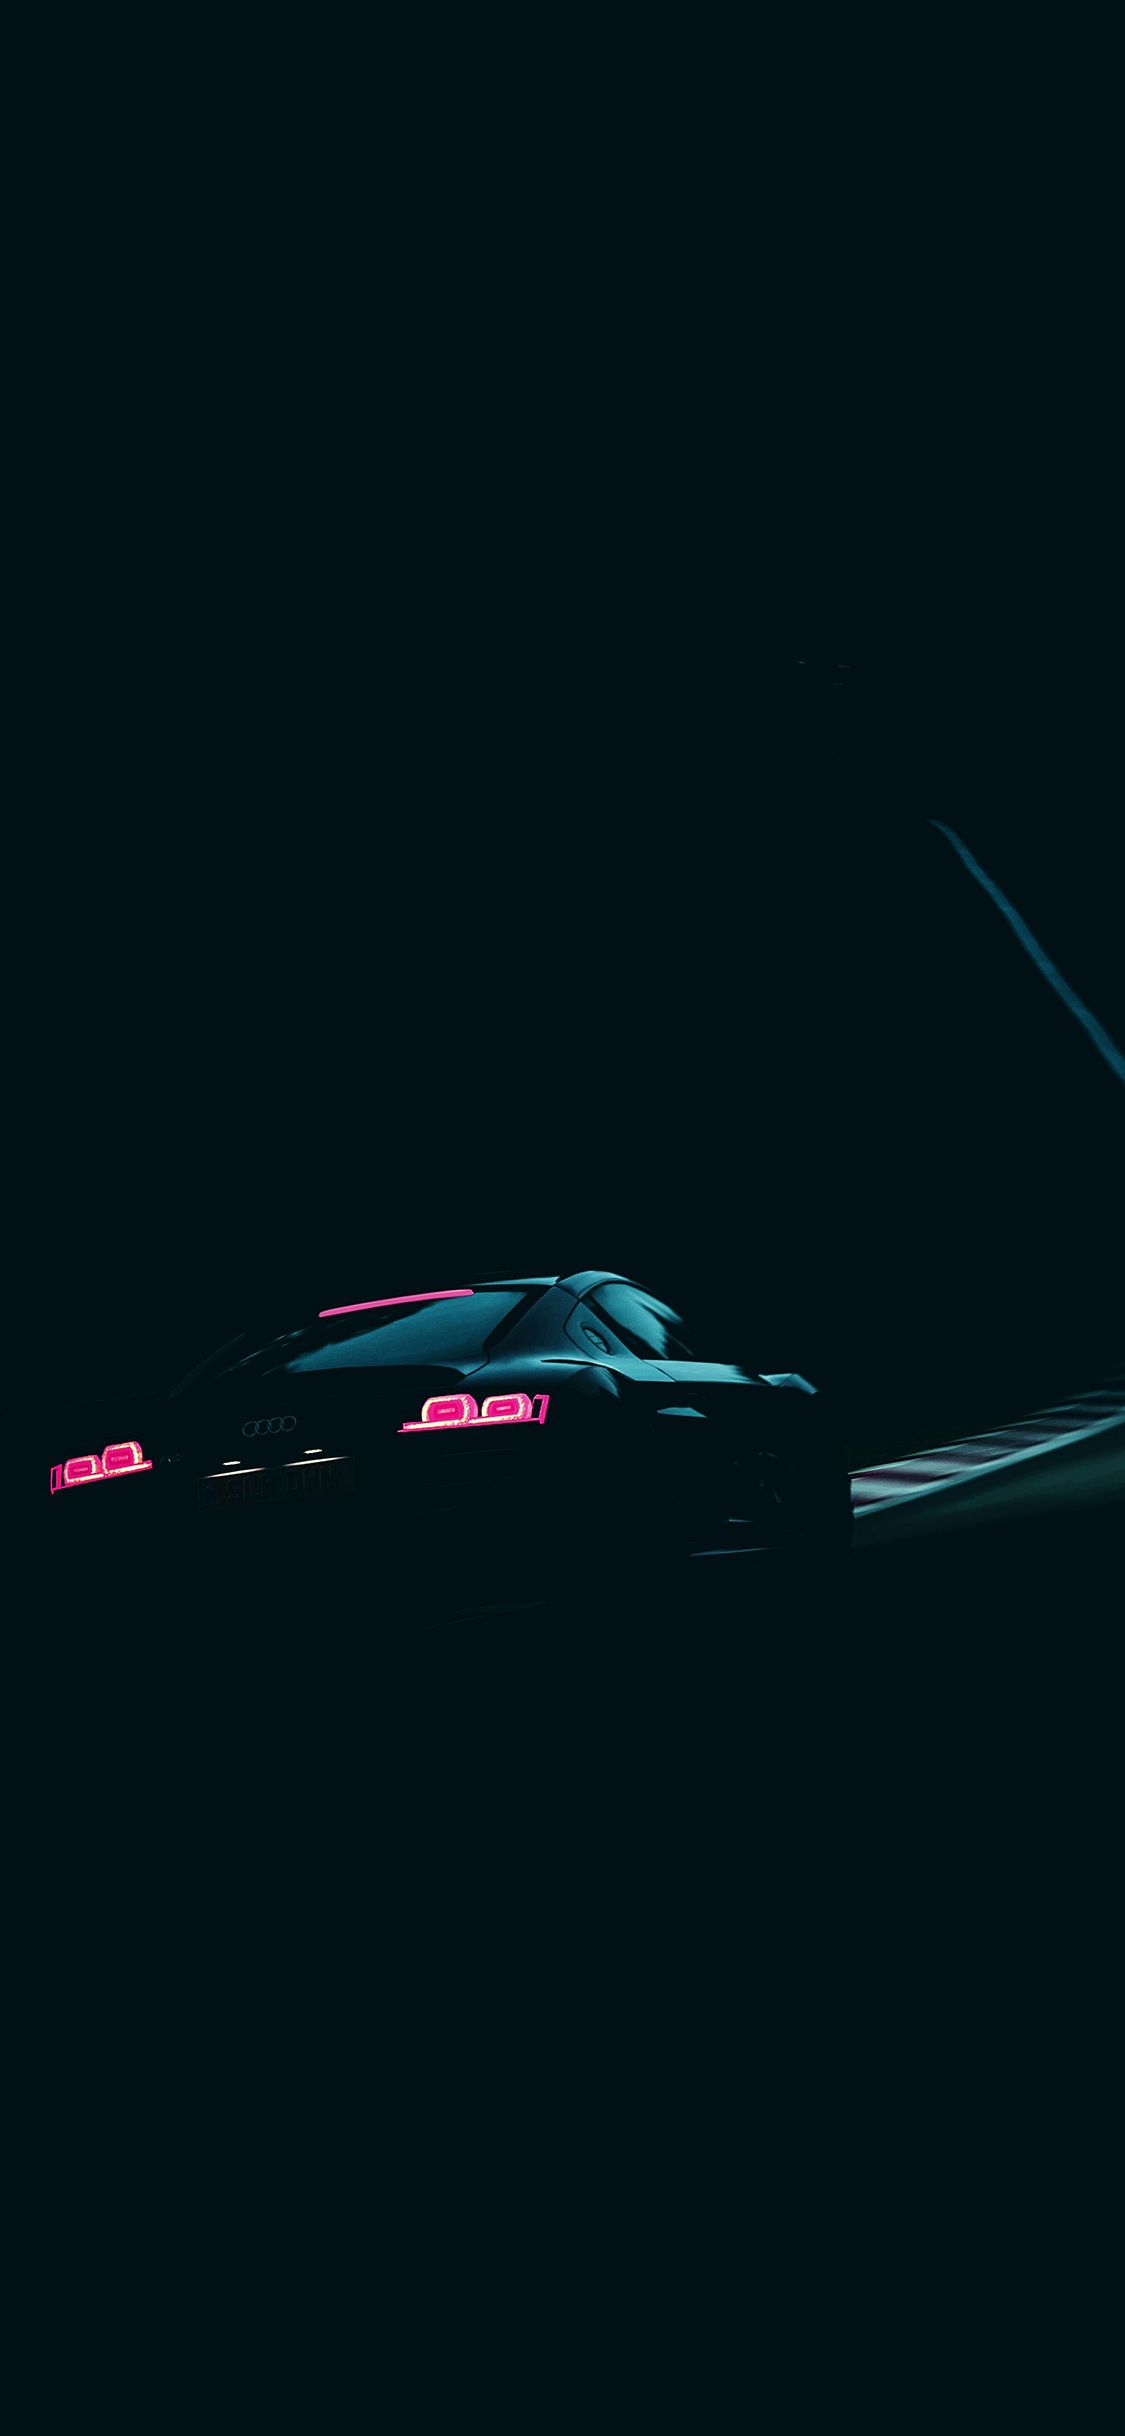 Cars Wallpaper For iPhone X iPhonexpapers